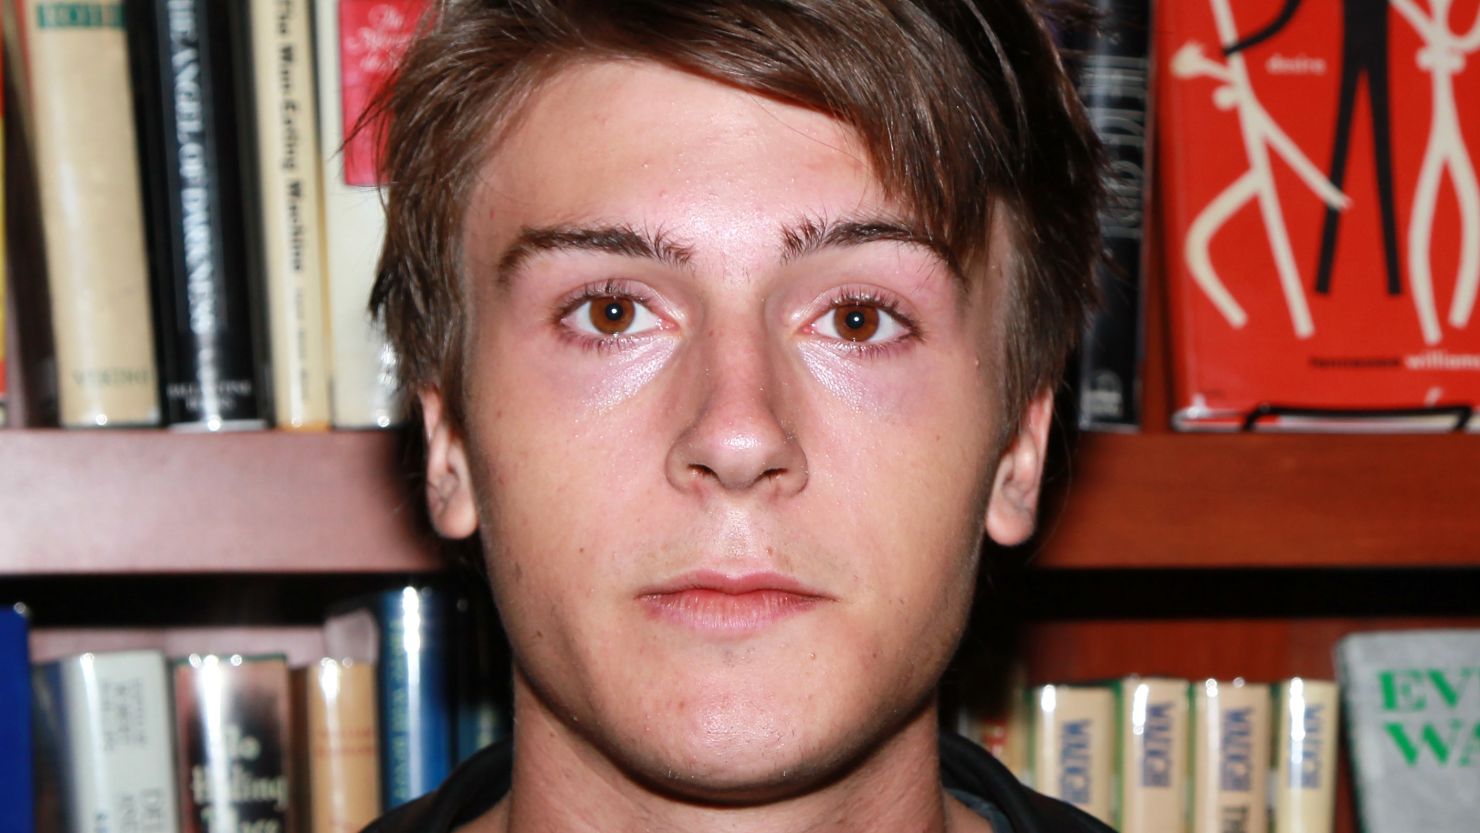 Indio Downey is shown at a 2011 event. Robert Downey Jr.'s son will be arraigned on August 29 on a drug possession charge.